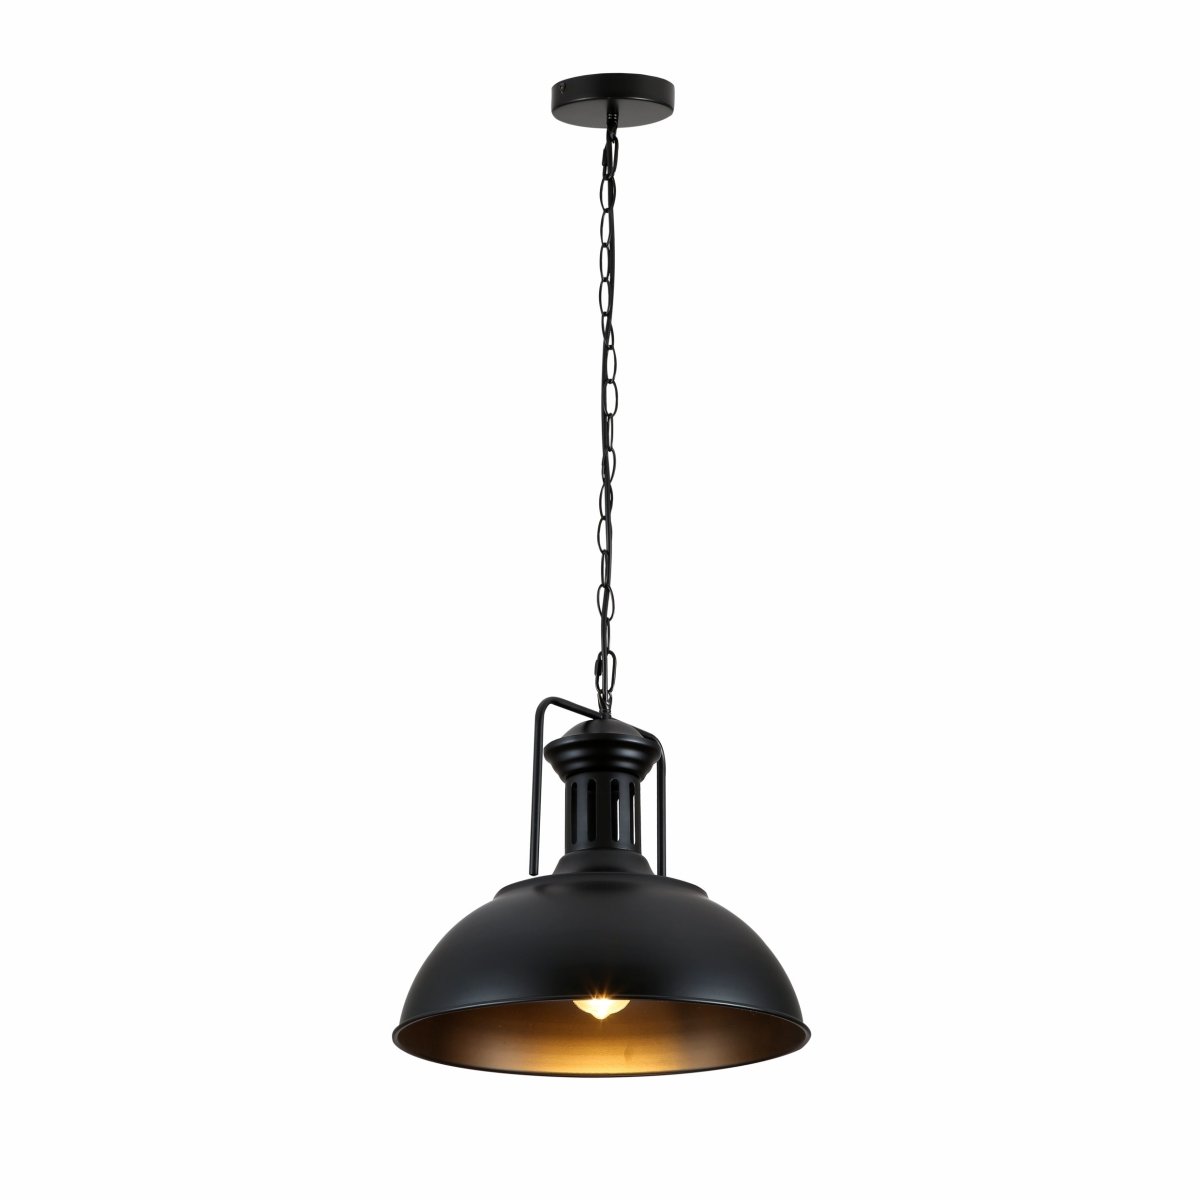 Main image of Black Dome Industrial Jumbo Metal Ceiling Pendant Light with E27 Fitting | TEKLED 150-18356